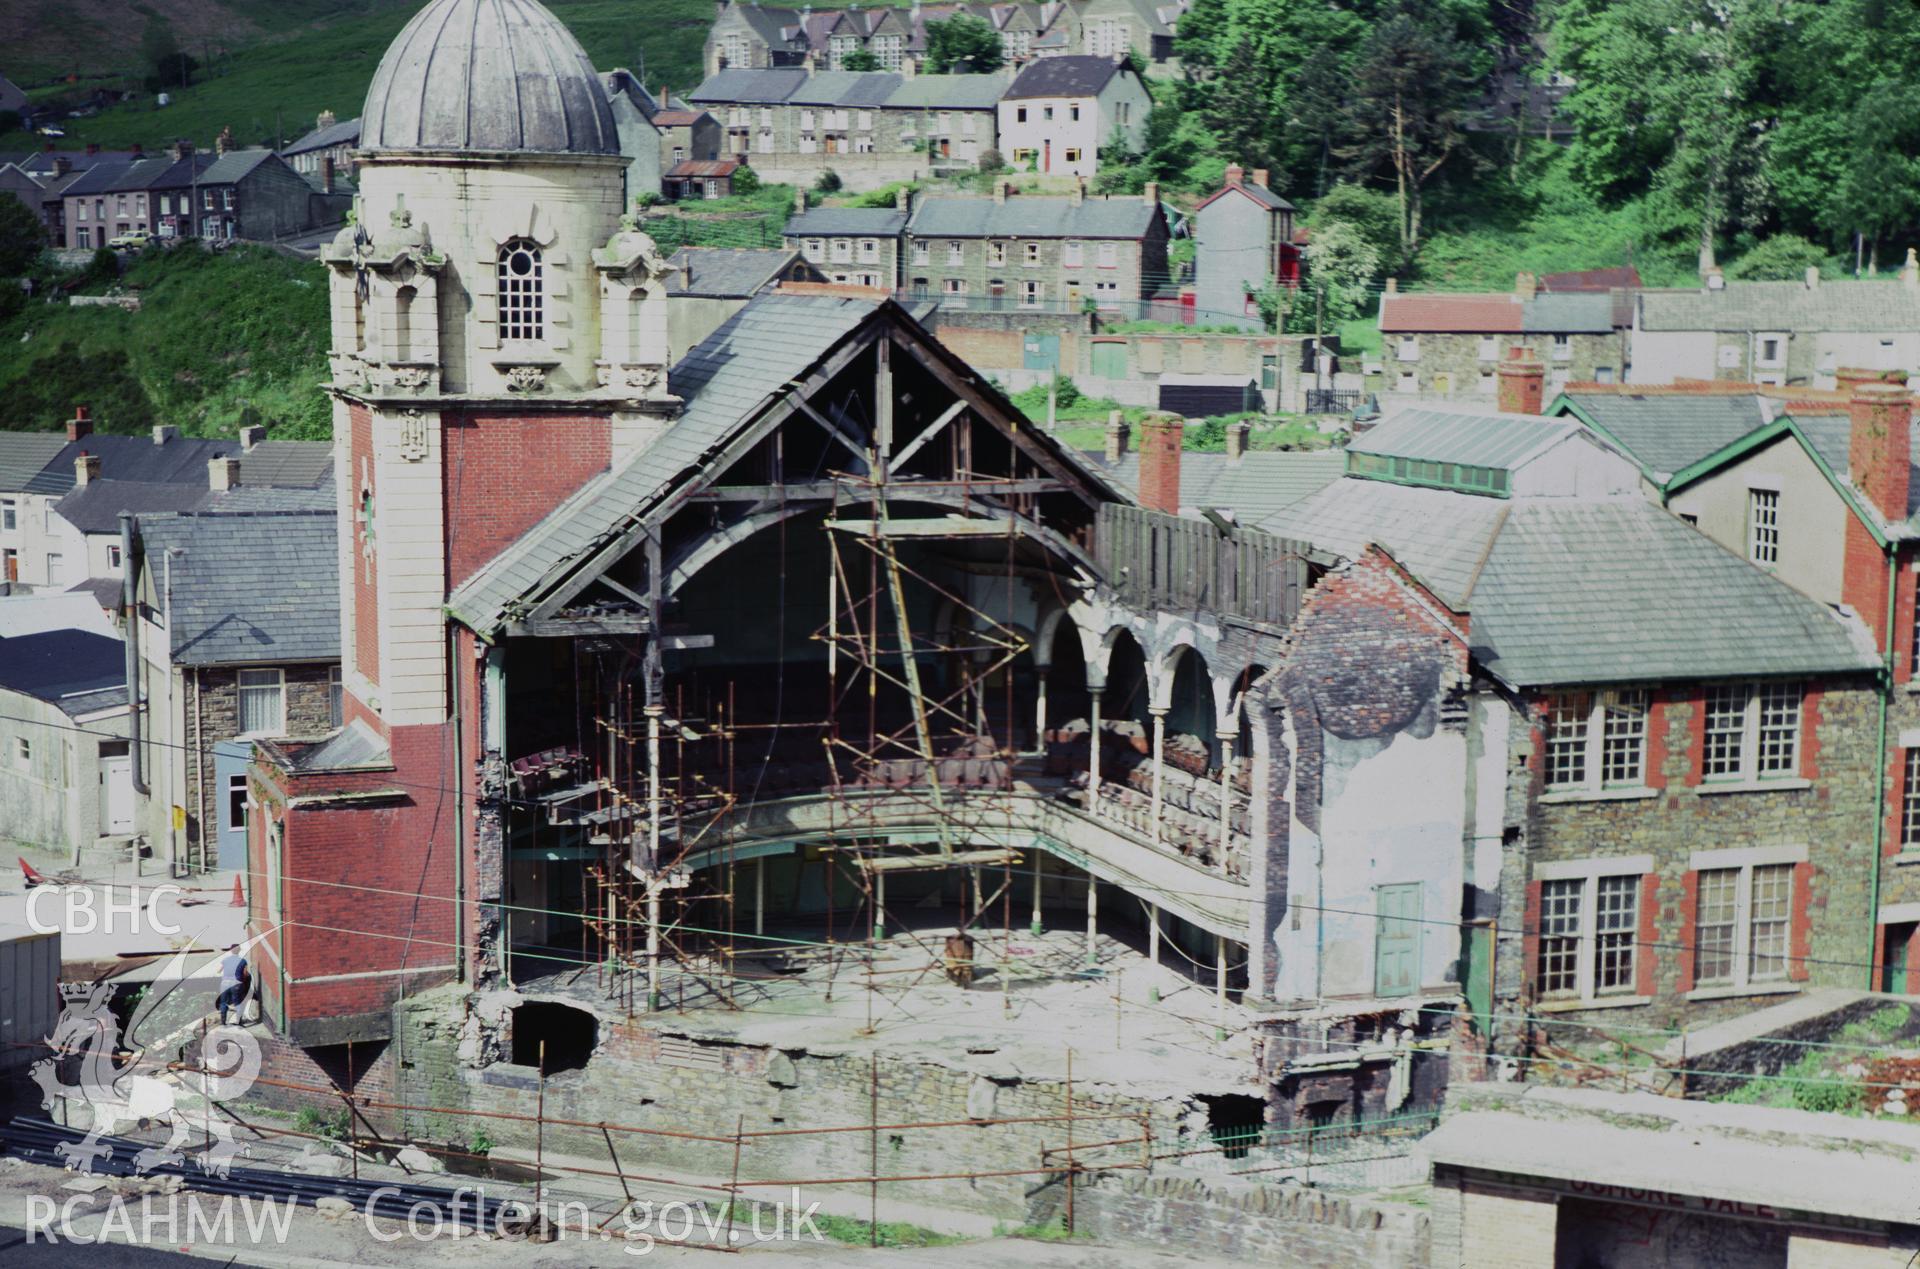 35mm colour slide showing the demolition of the Workmens Hall & Institute, Ogmore Vale Glamorgan by Dylan Roberts